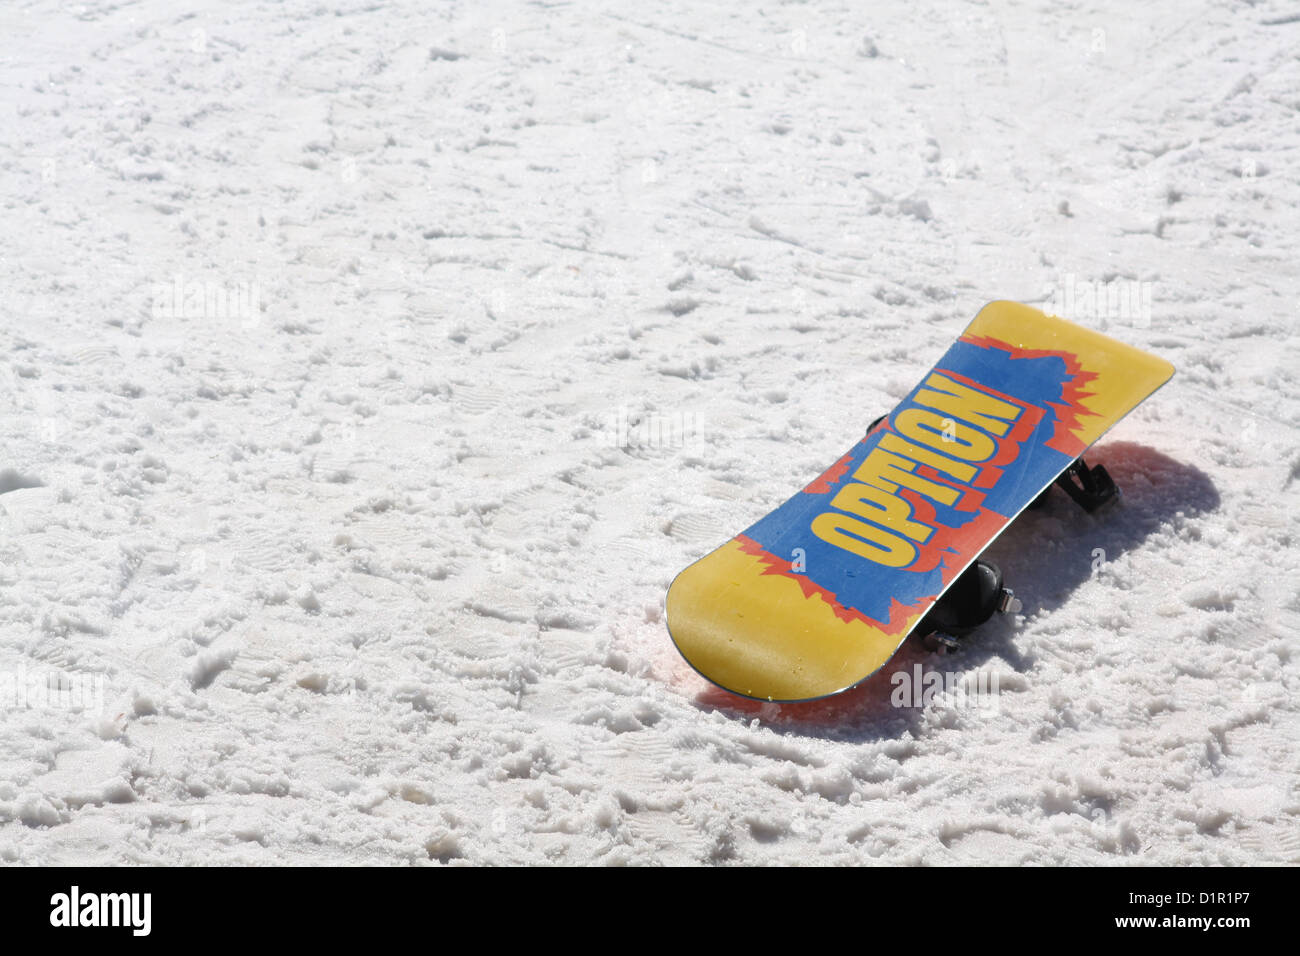 Canary yellow snowboard lies upside down in snow revealing large blue and red Option logo on the underside Stock Photo